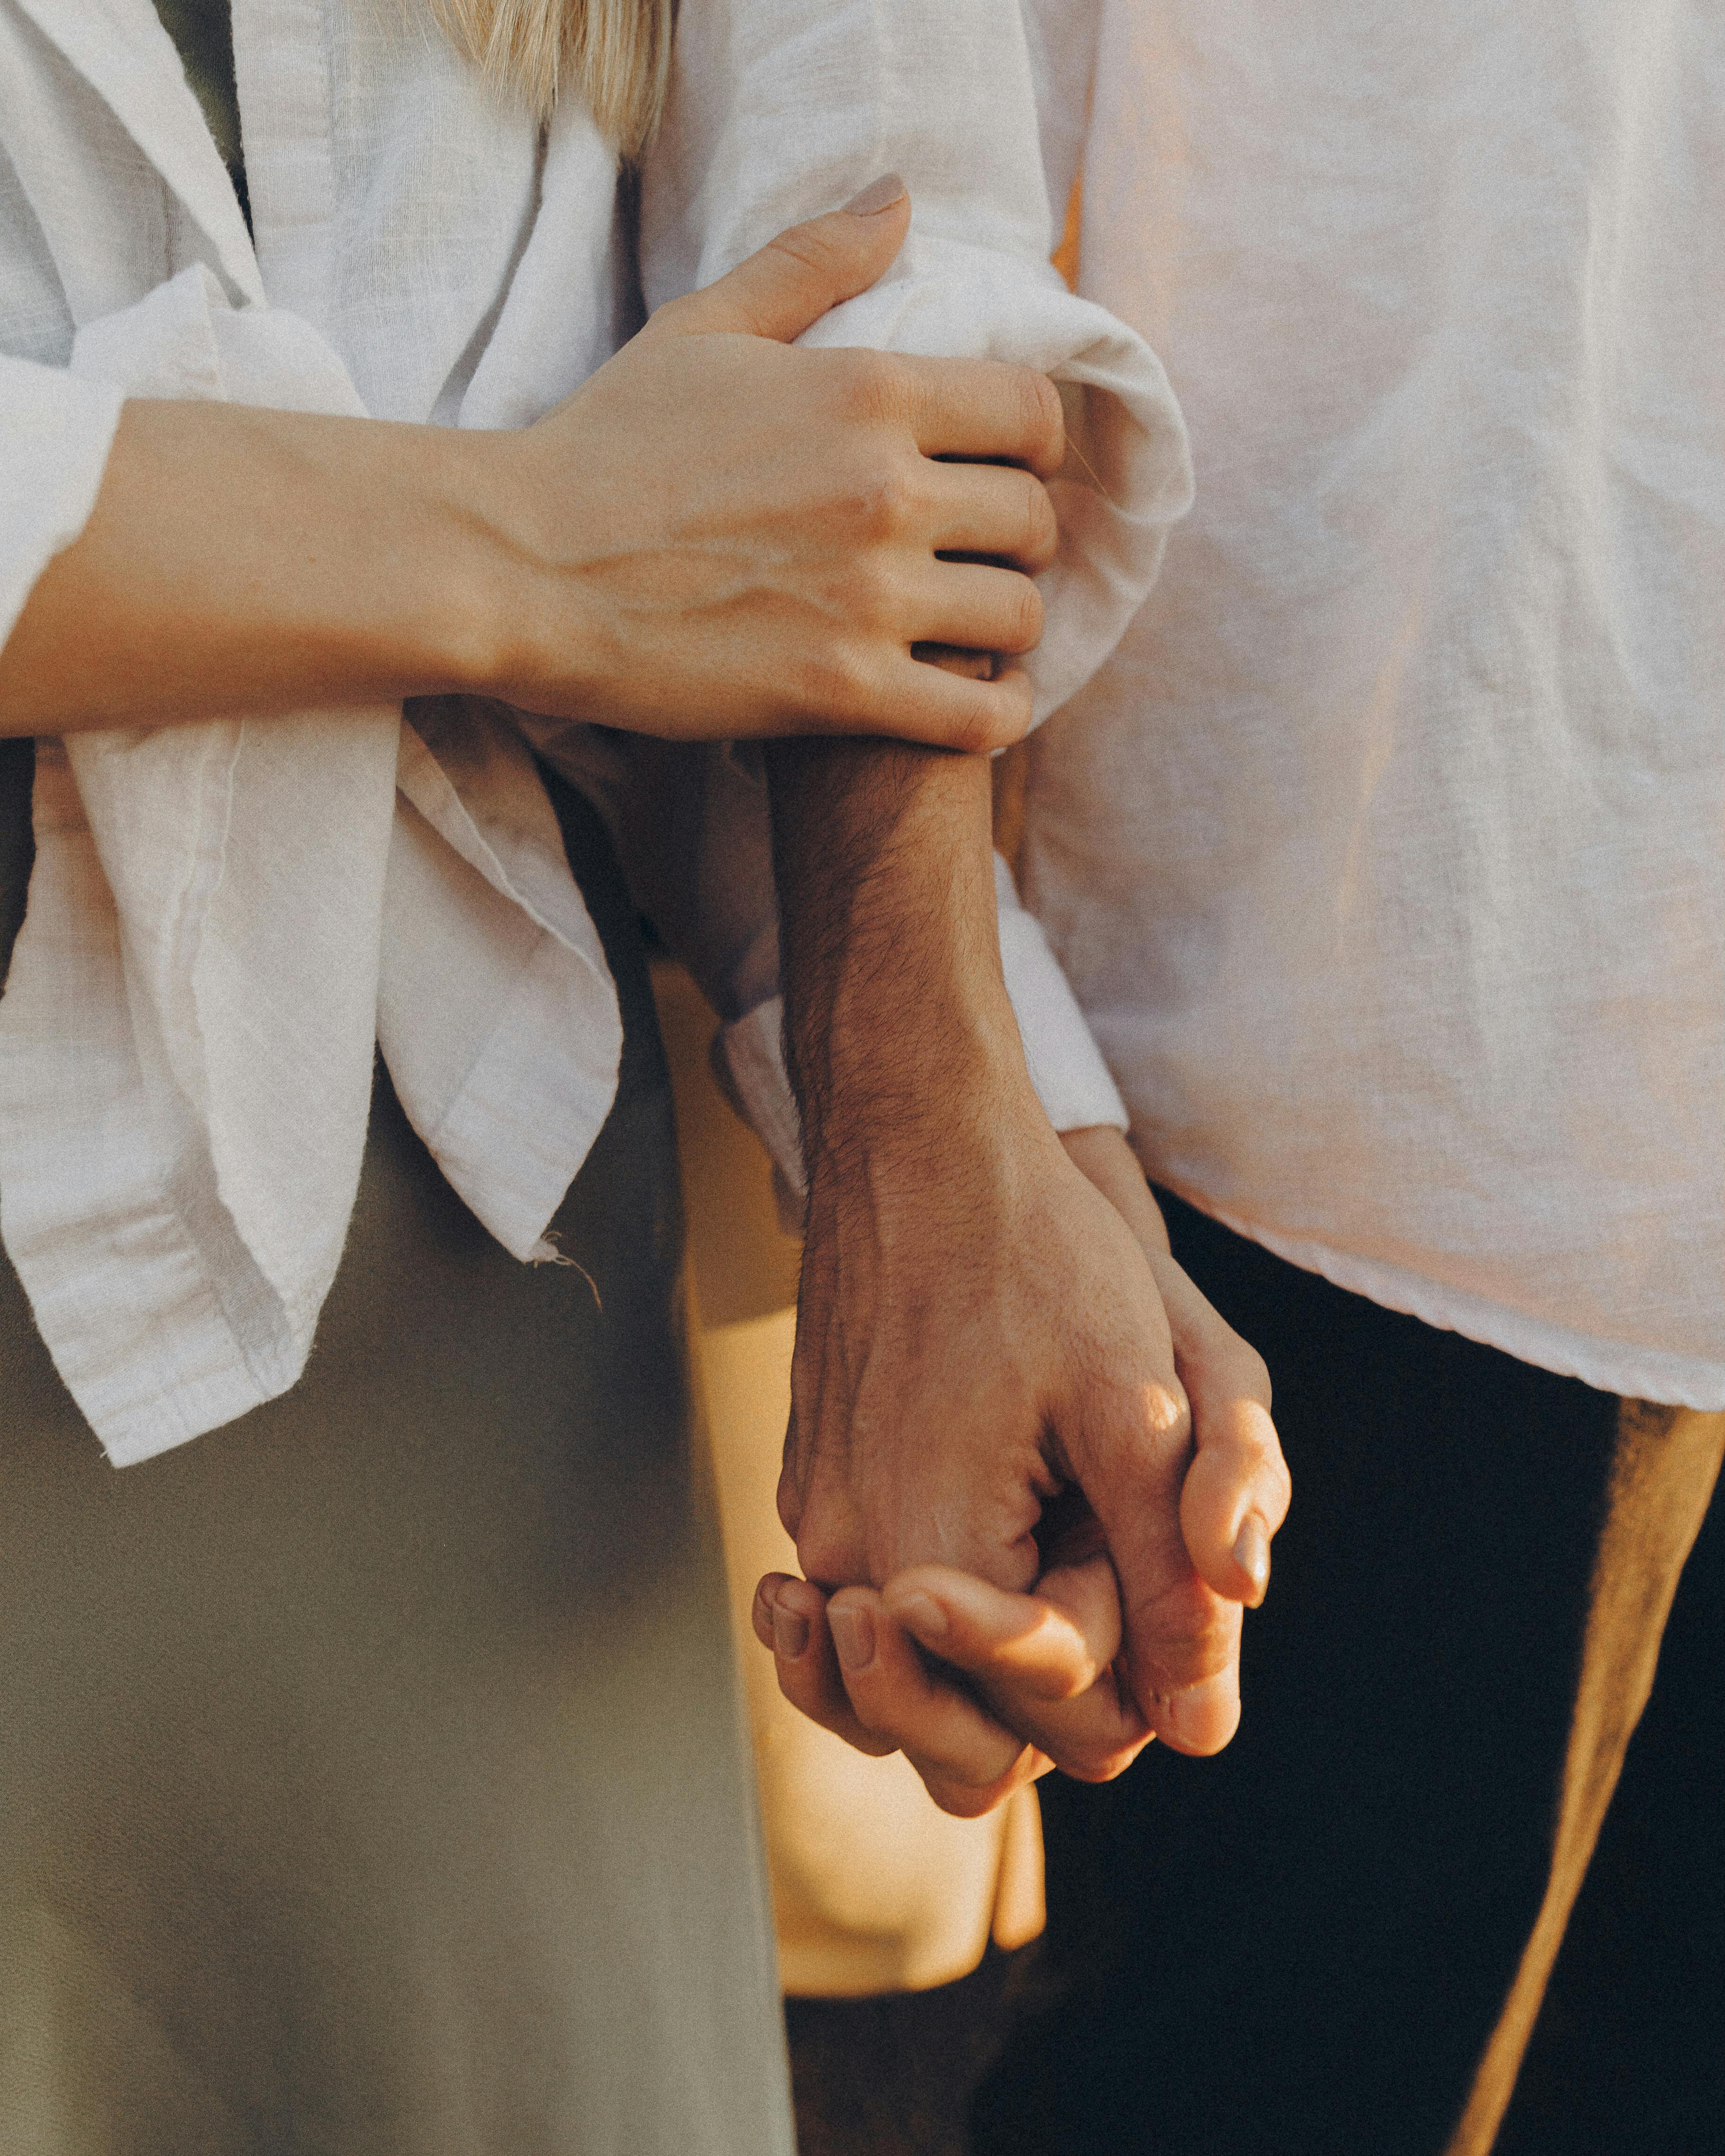 A woman caressing a man's arm while holding hands | Source: Pexels